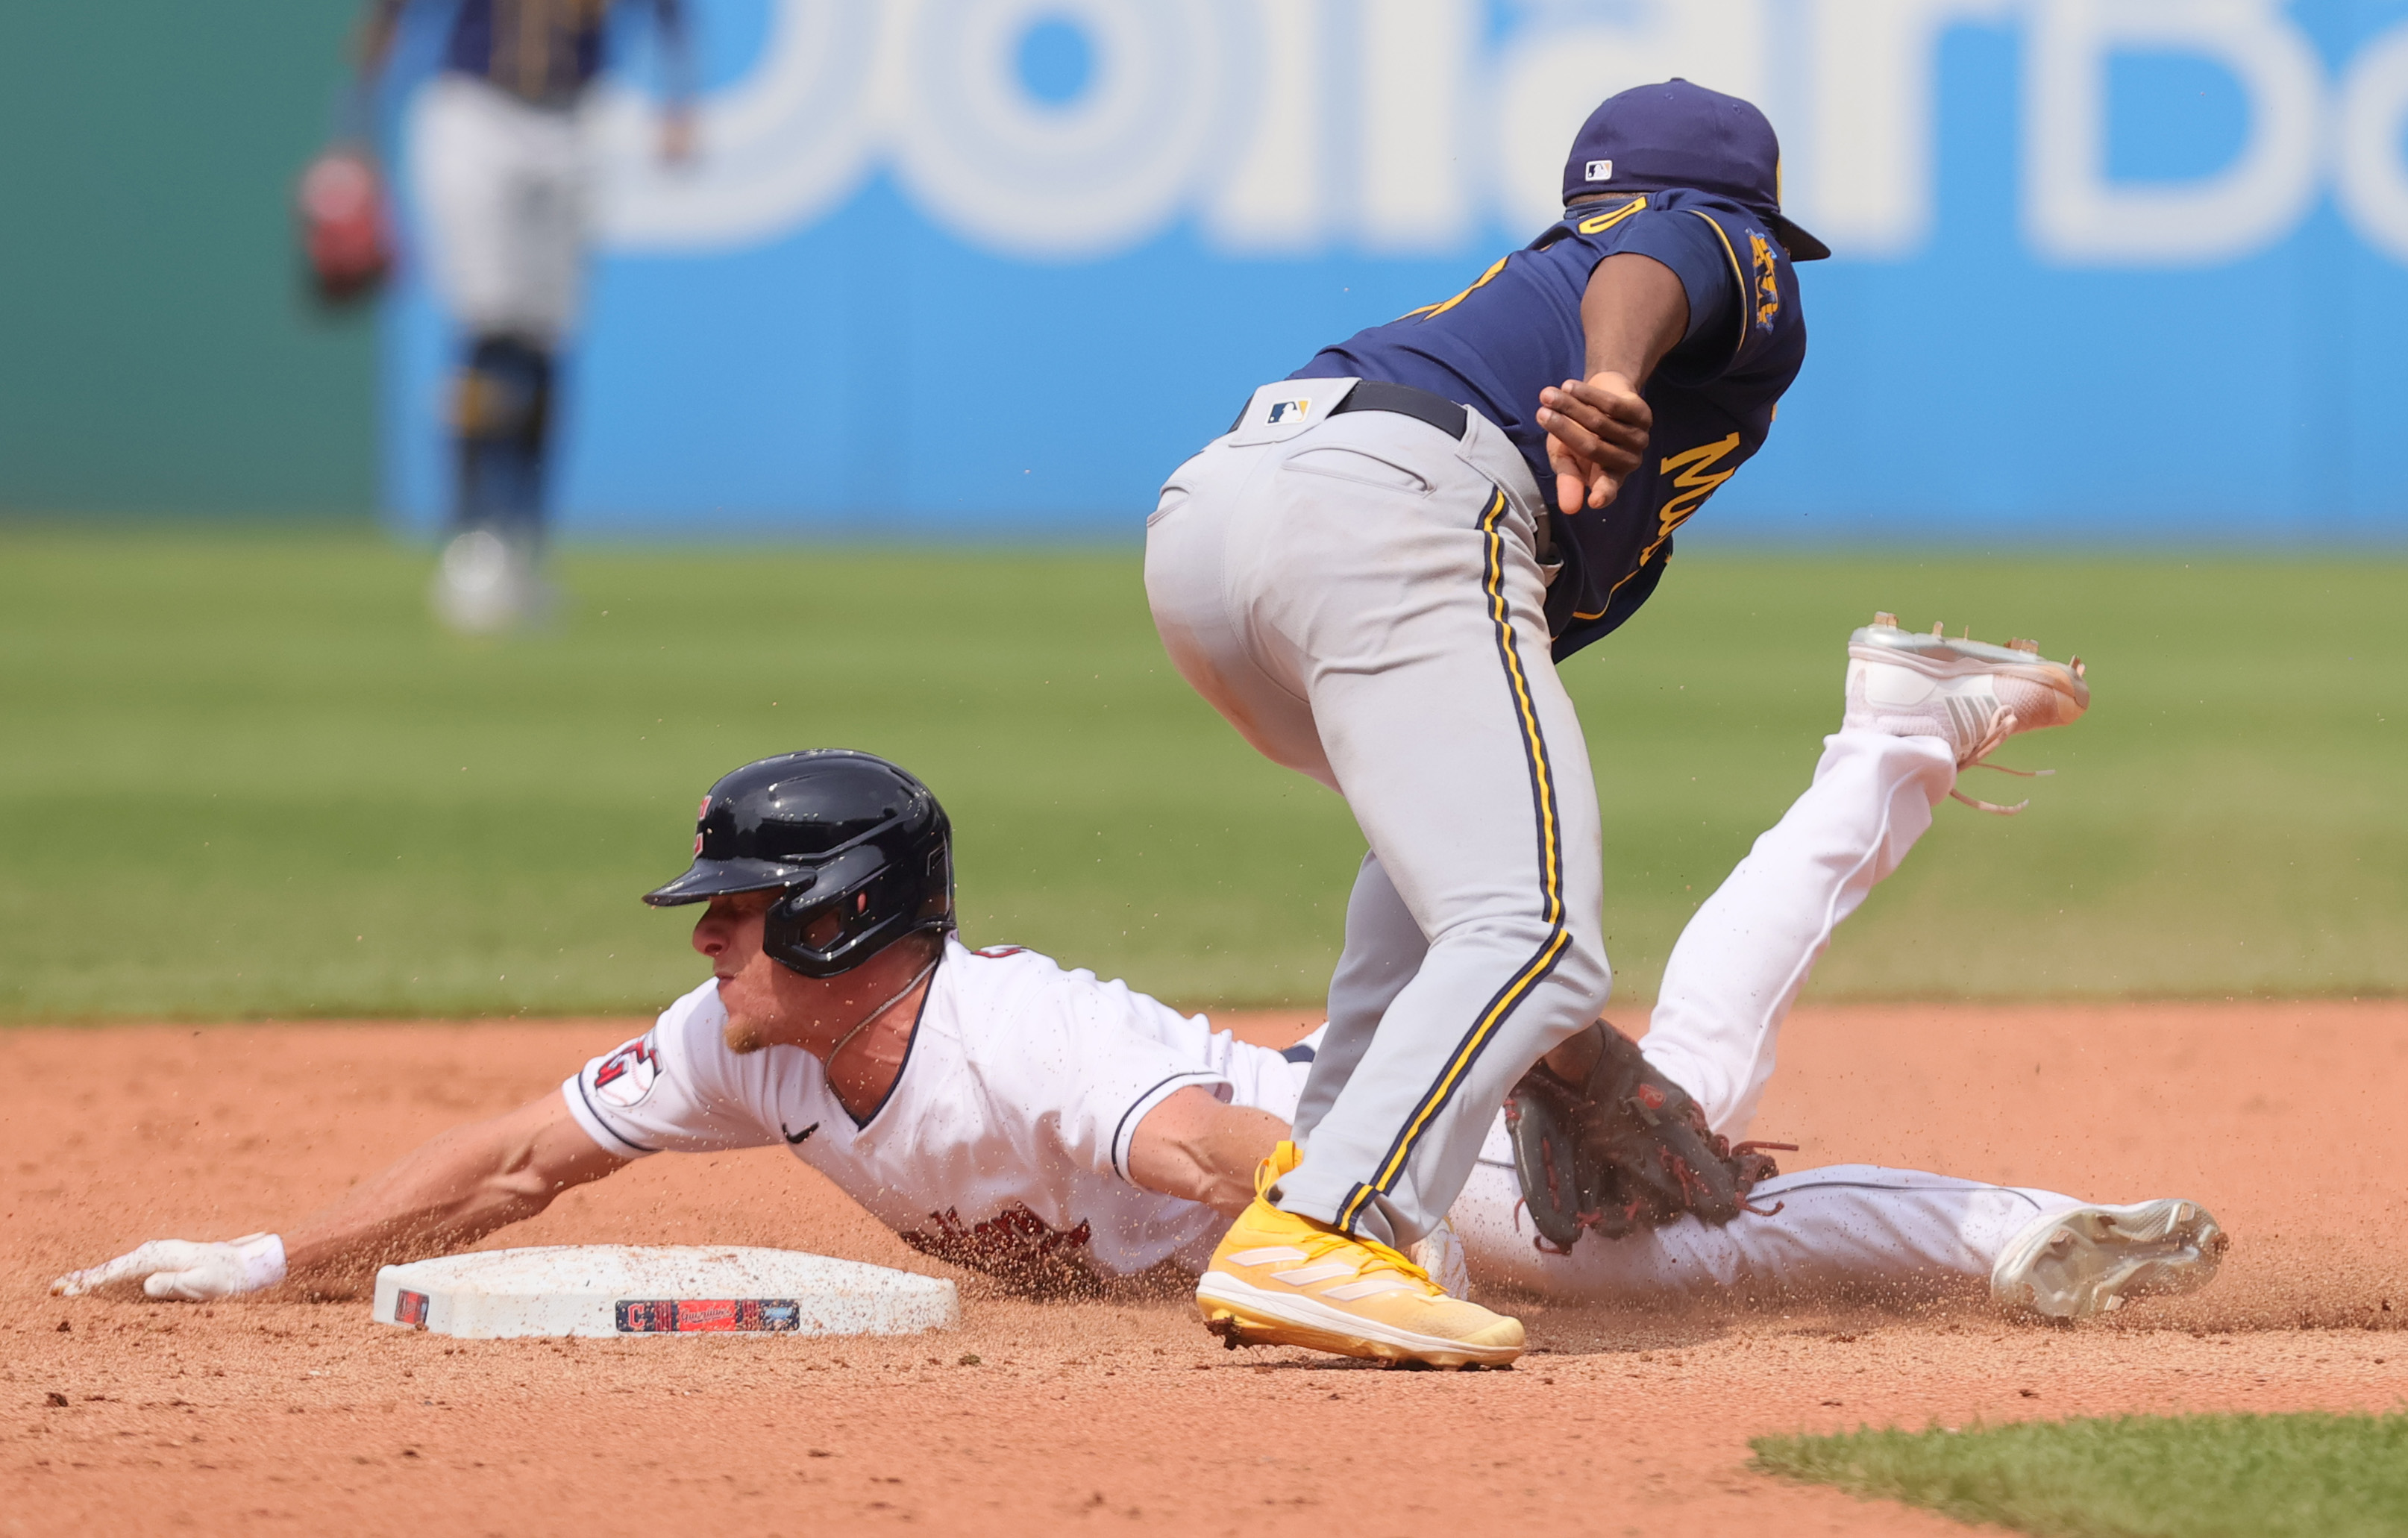 Brewers trounce Guardians, 12-3 - Brew Crew Ball